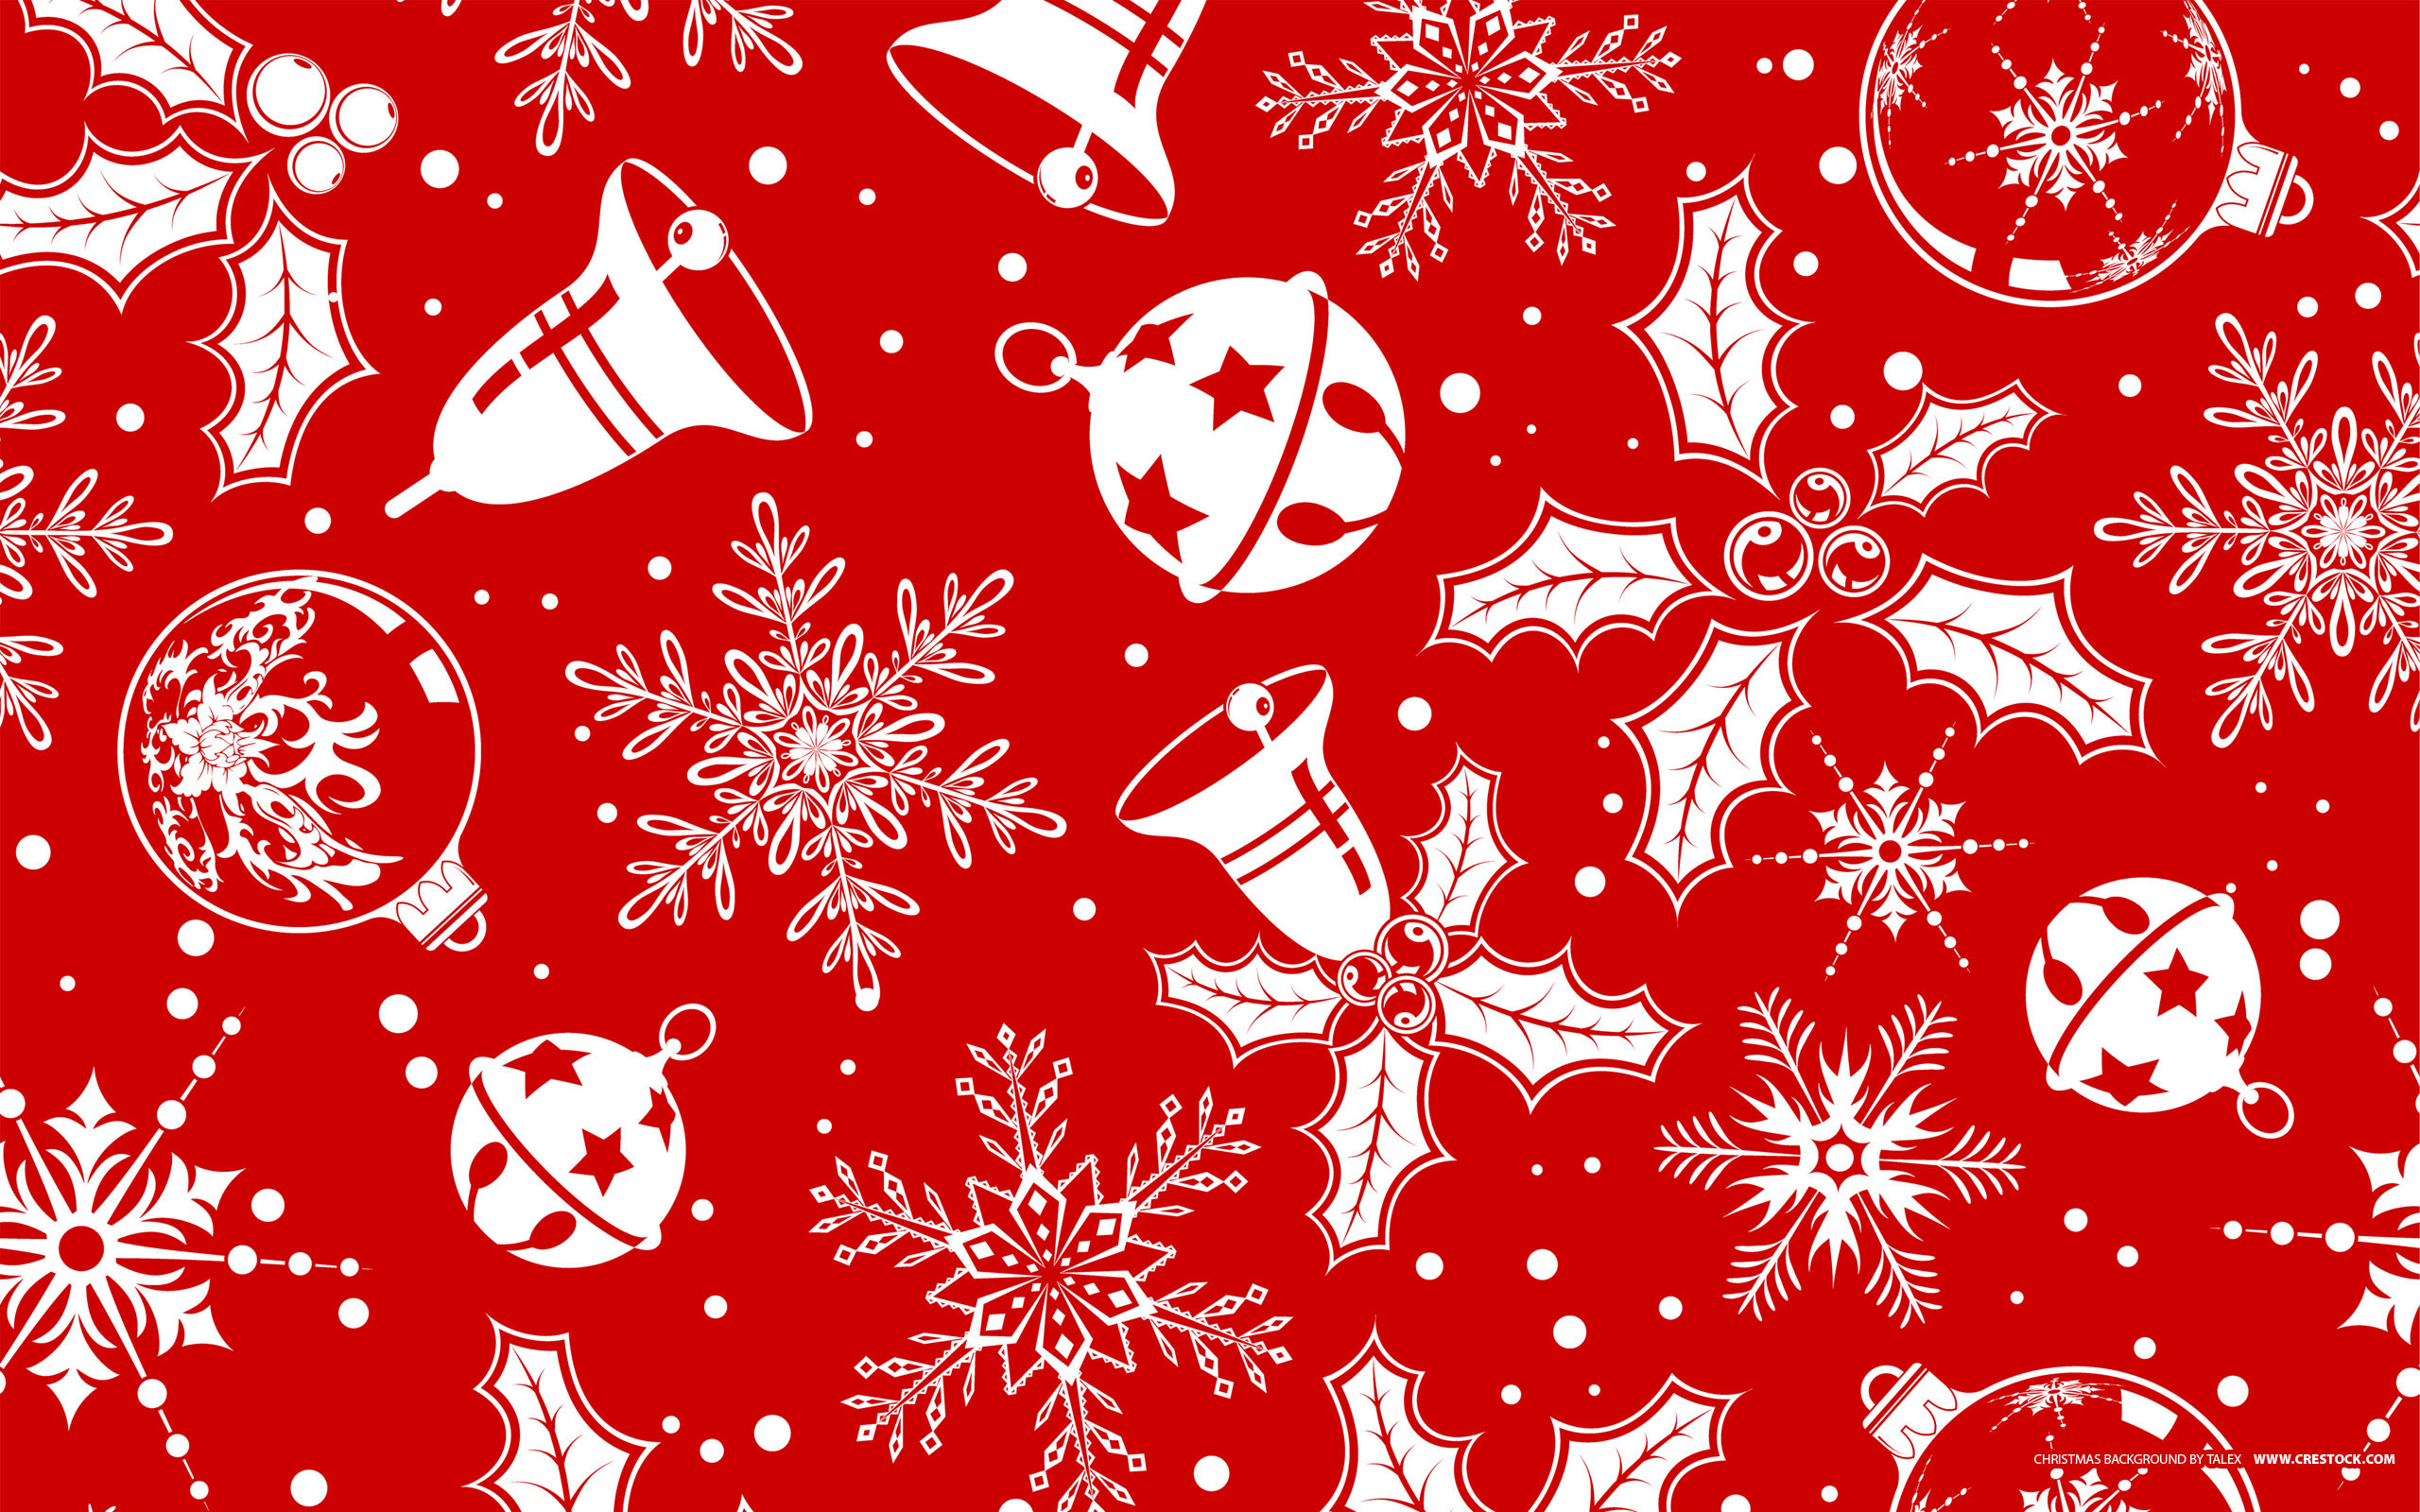 2560x1600 Buy this image or view all images by TAlex. Christmas background